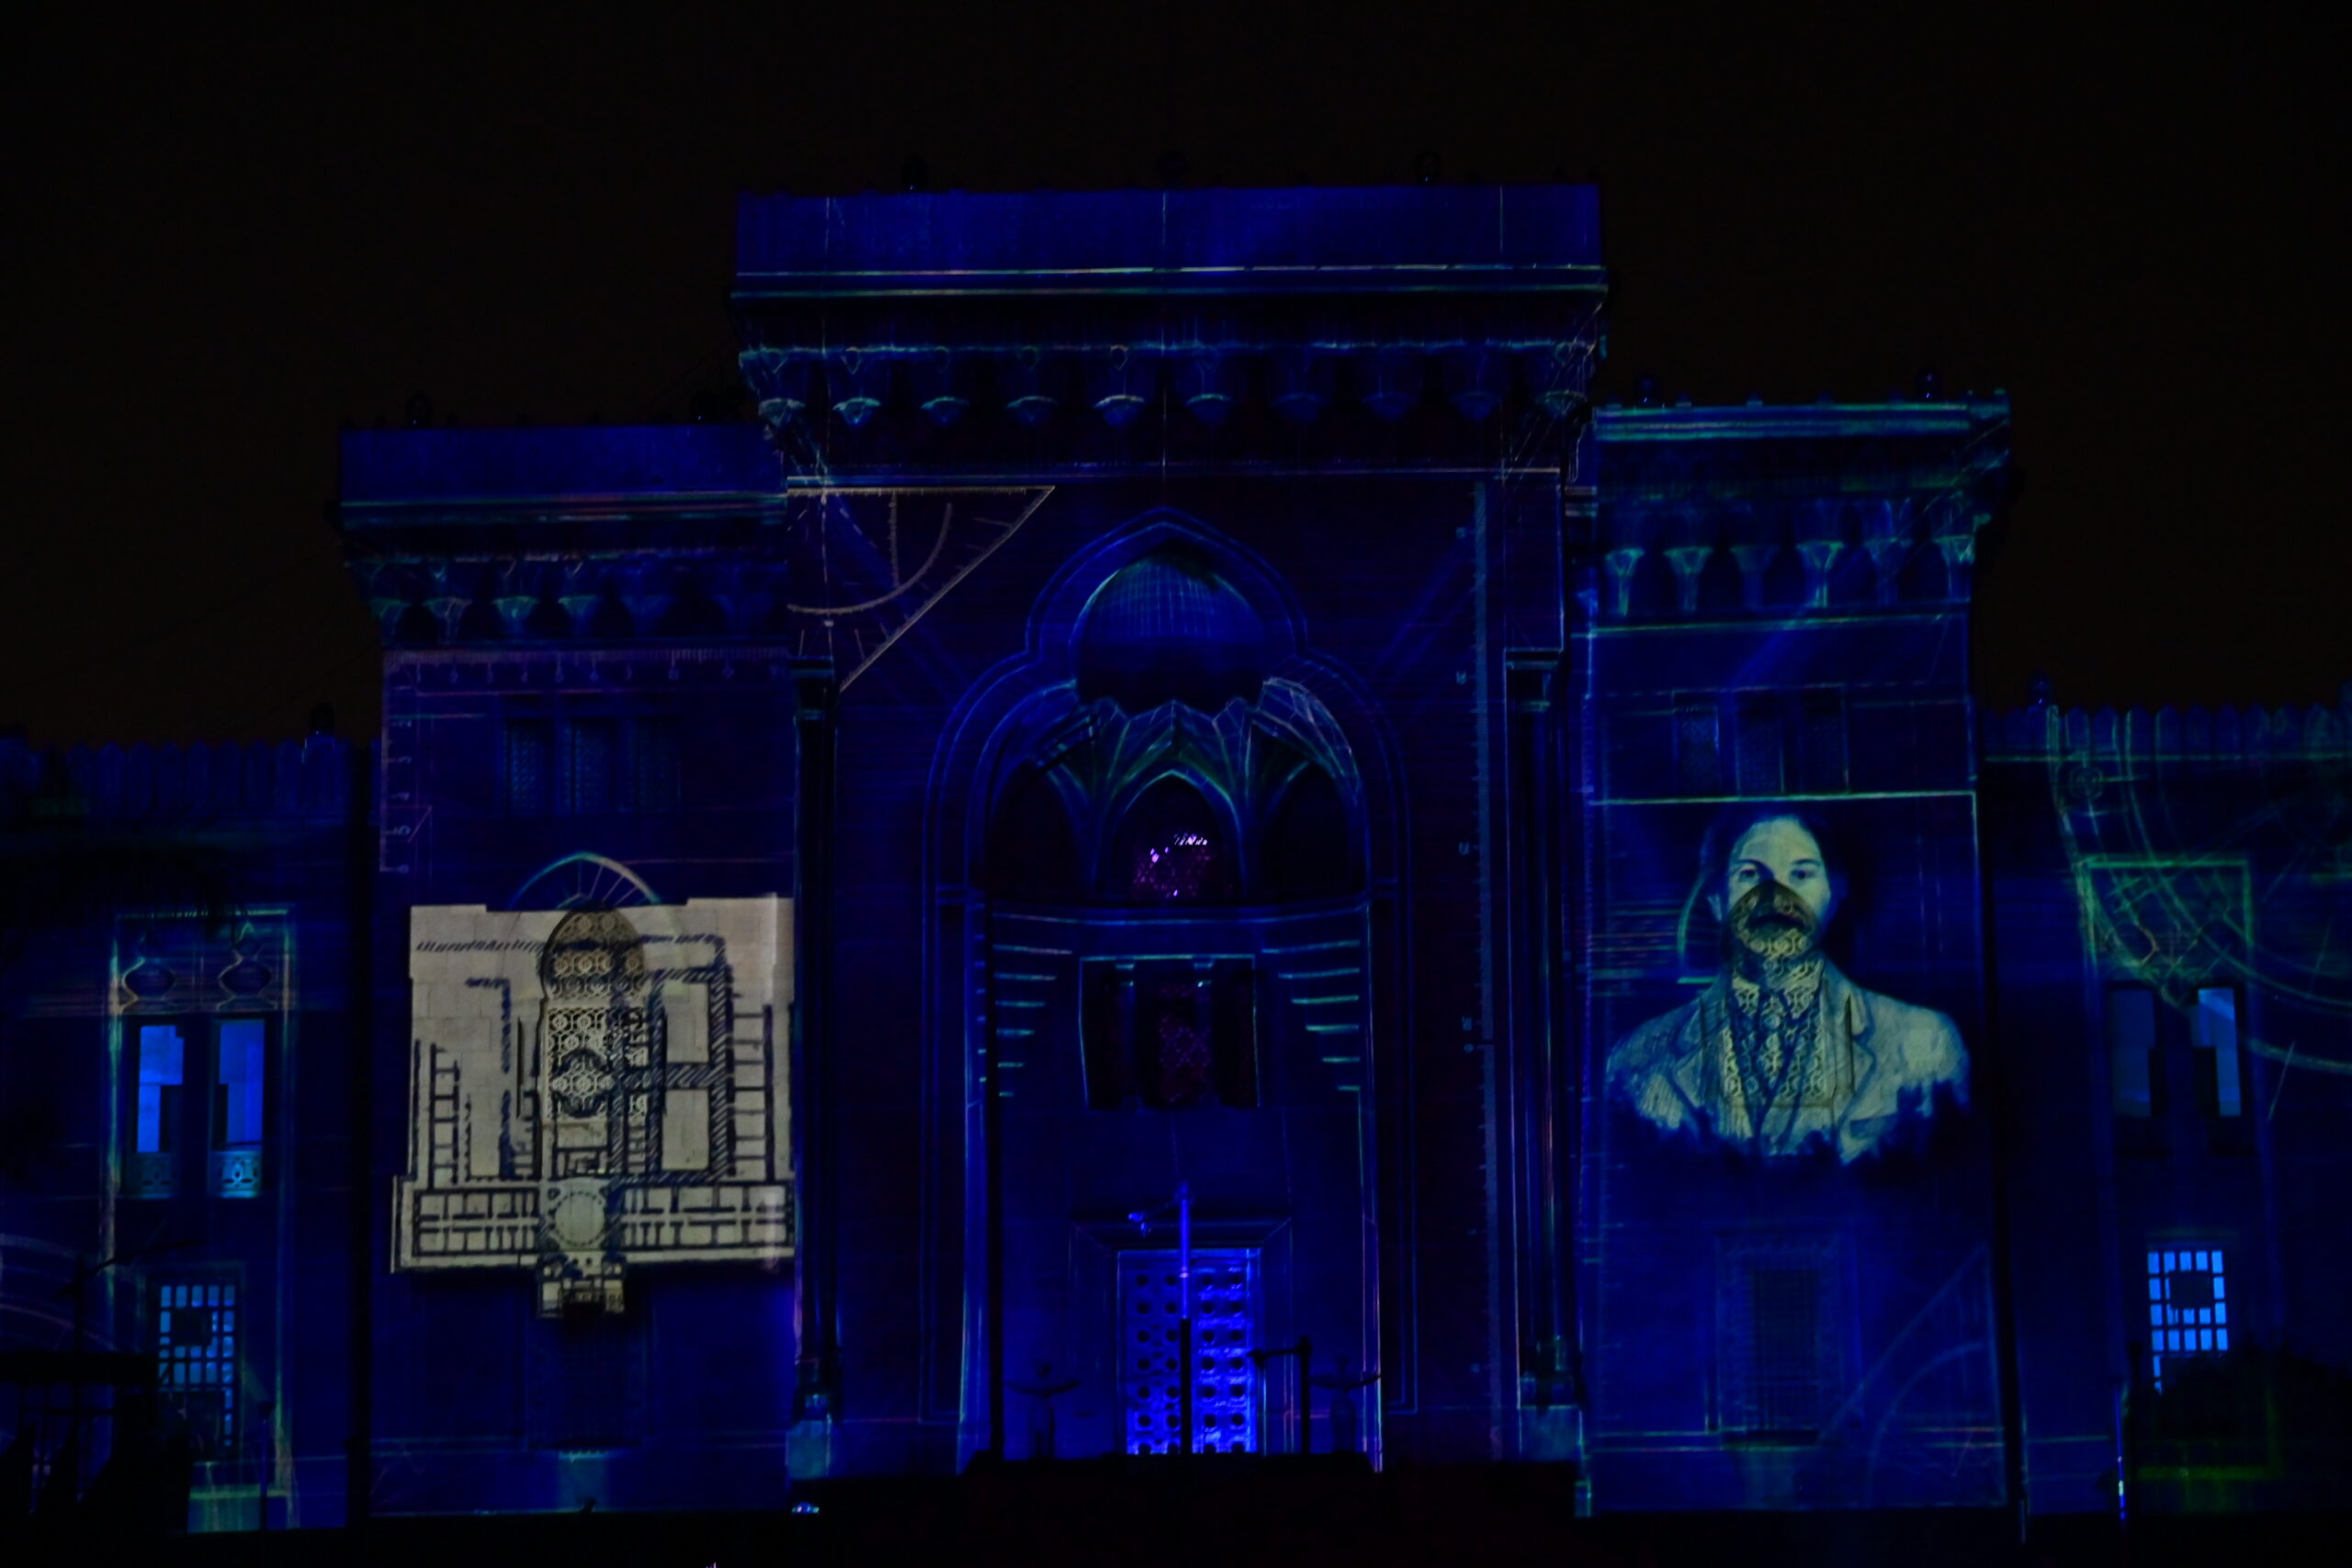 Dynamic Laser Show At Arts College In Osmania University (12)